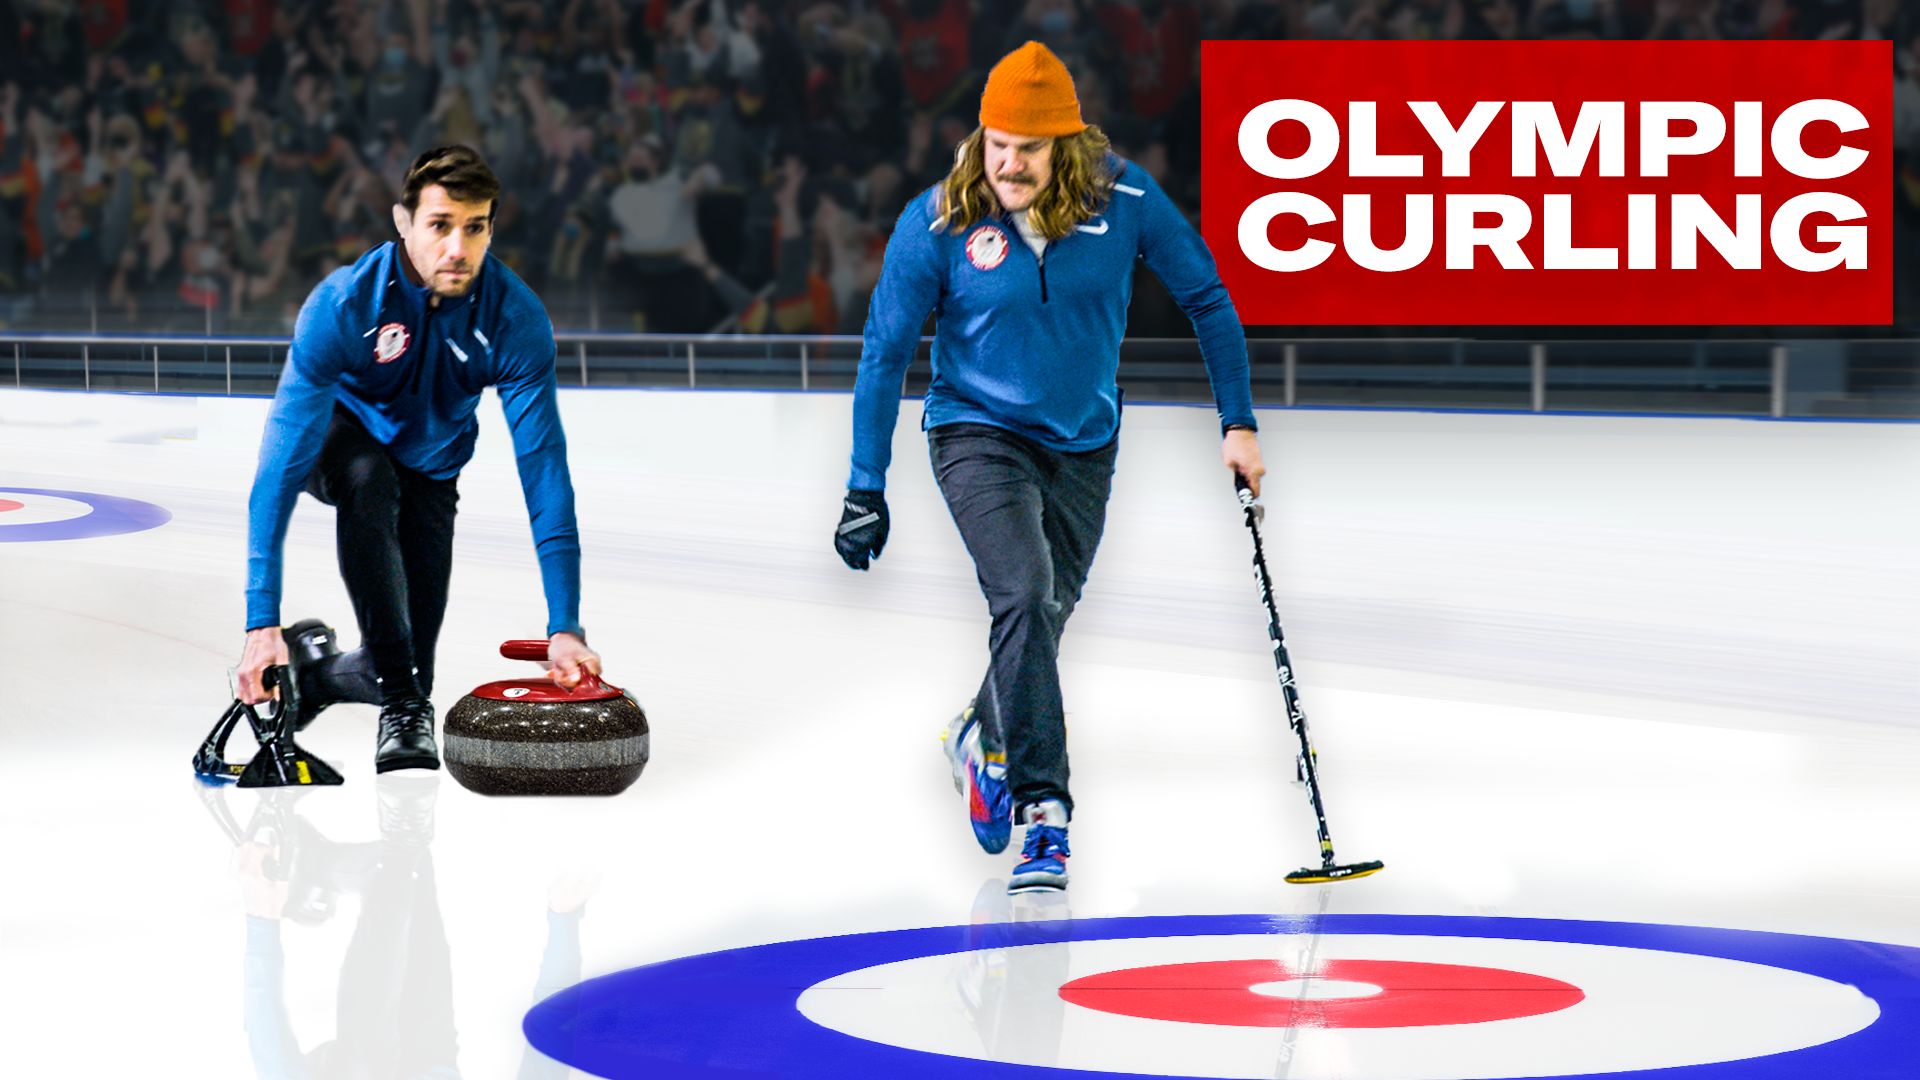 Watch Can an Average Guy Beat the US Olympic Curling Team? Above Average Joe GQ